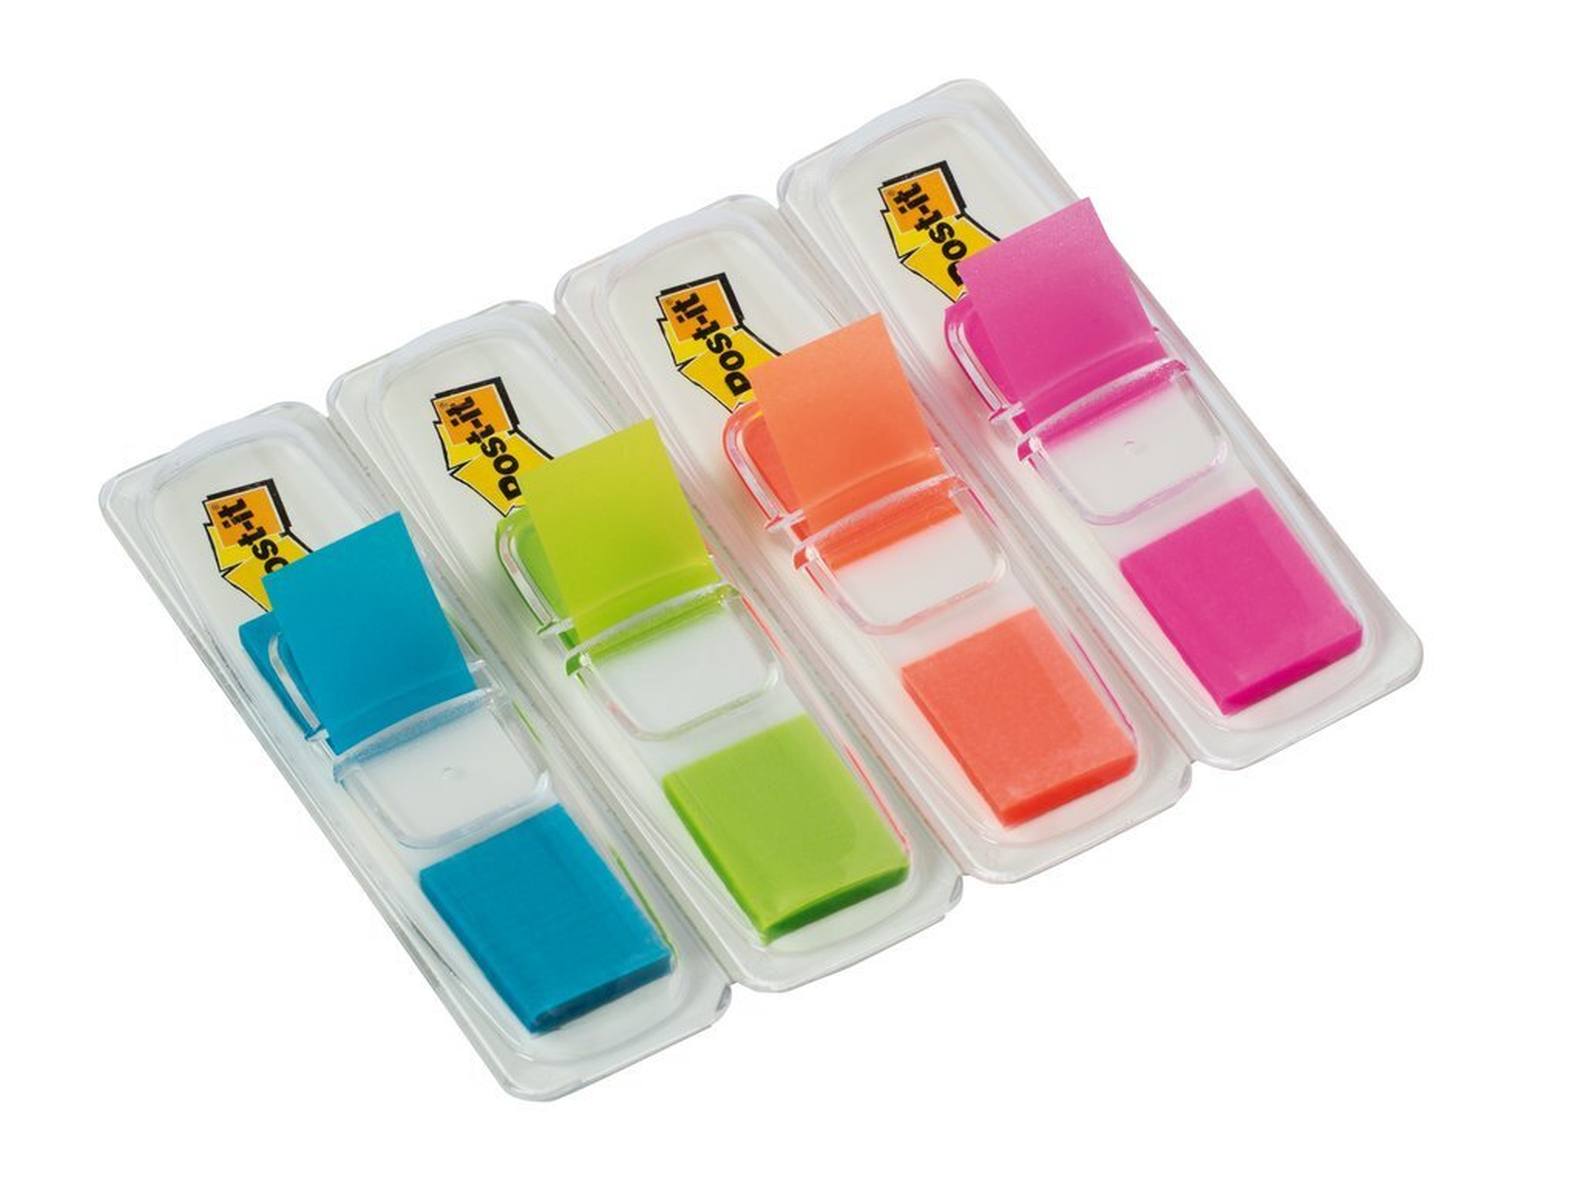 3M Post-it Index Mini 683-4ABP, 11.9 mm x 43.2 mm, lime green, orange, pink, turquoise, 3 x 35 adhesive strips in dispenser